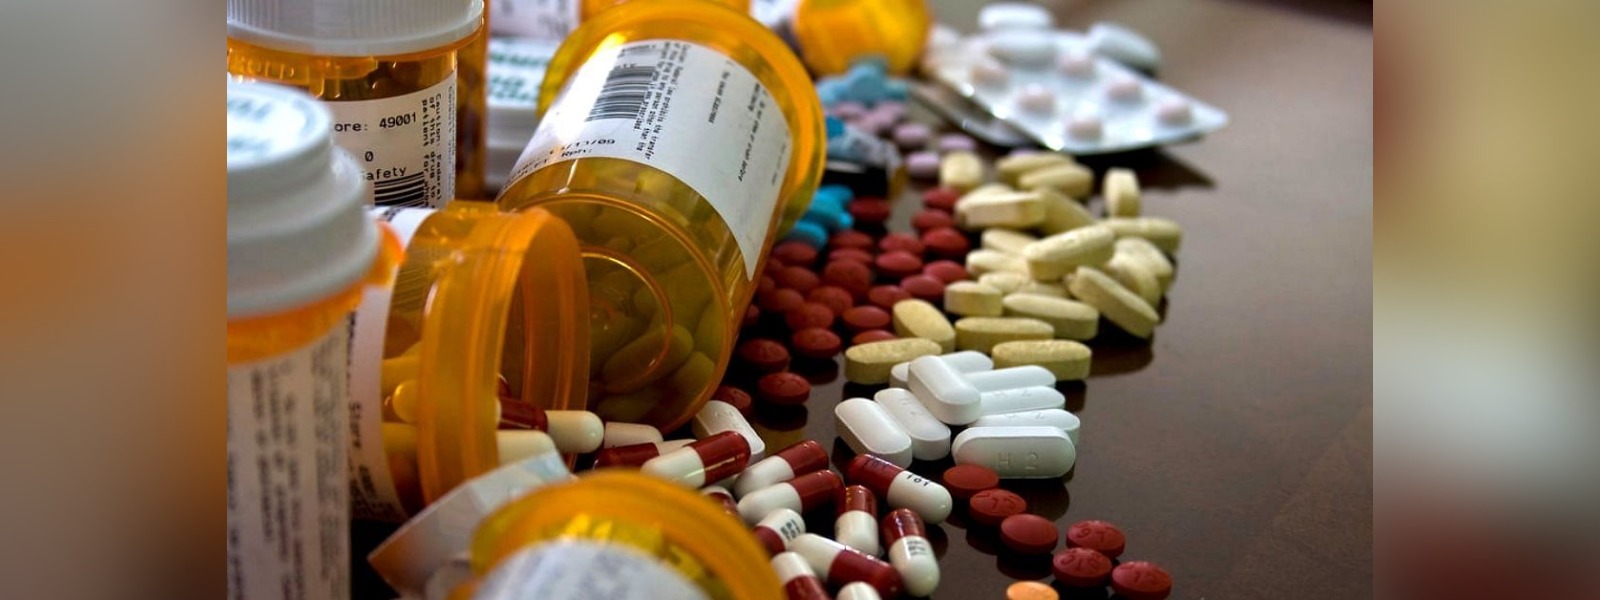 USD 400Mn received to import essential drugs